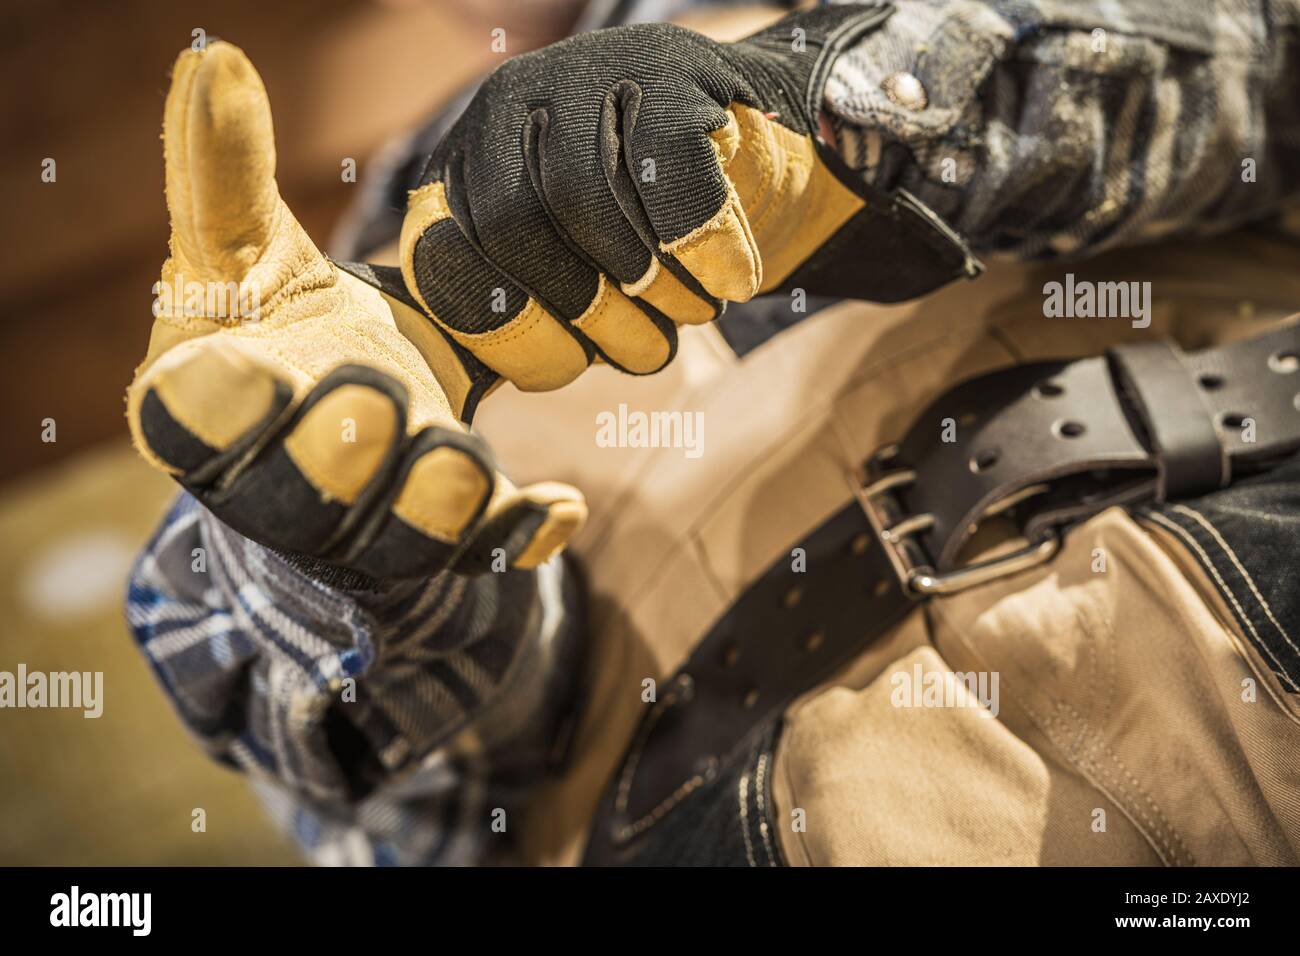 Industrial Theme. Construction Worker Wearing Heavy Duty Safety Gloves. Stock Photo